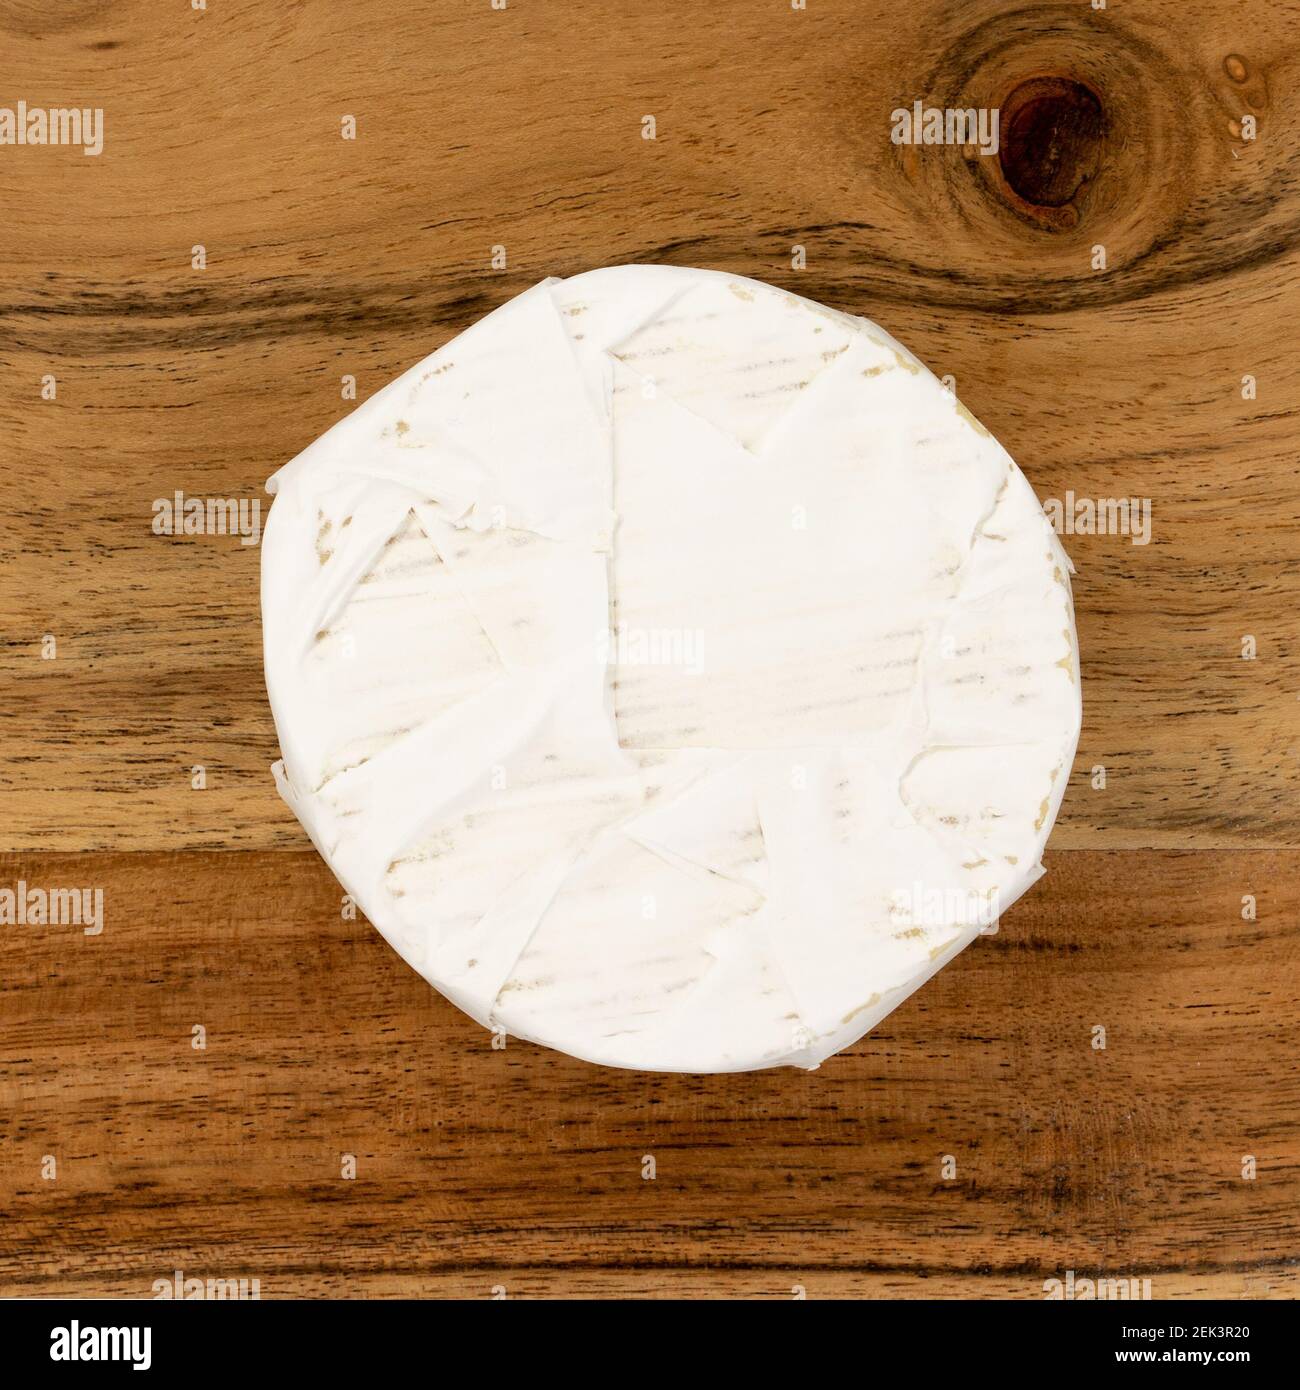 Brie or camambert cheese on wooden a board. Stock Photo